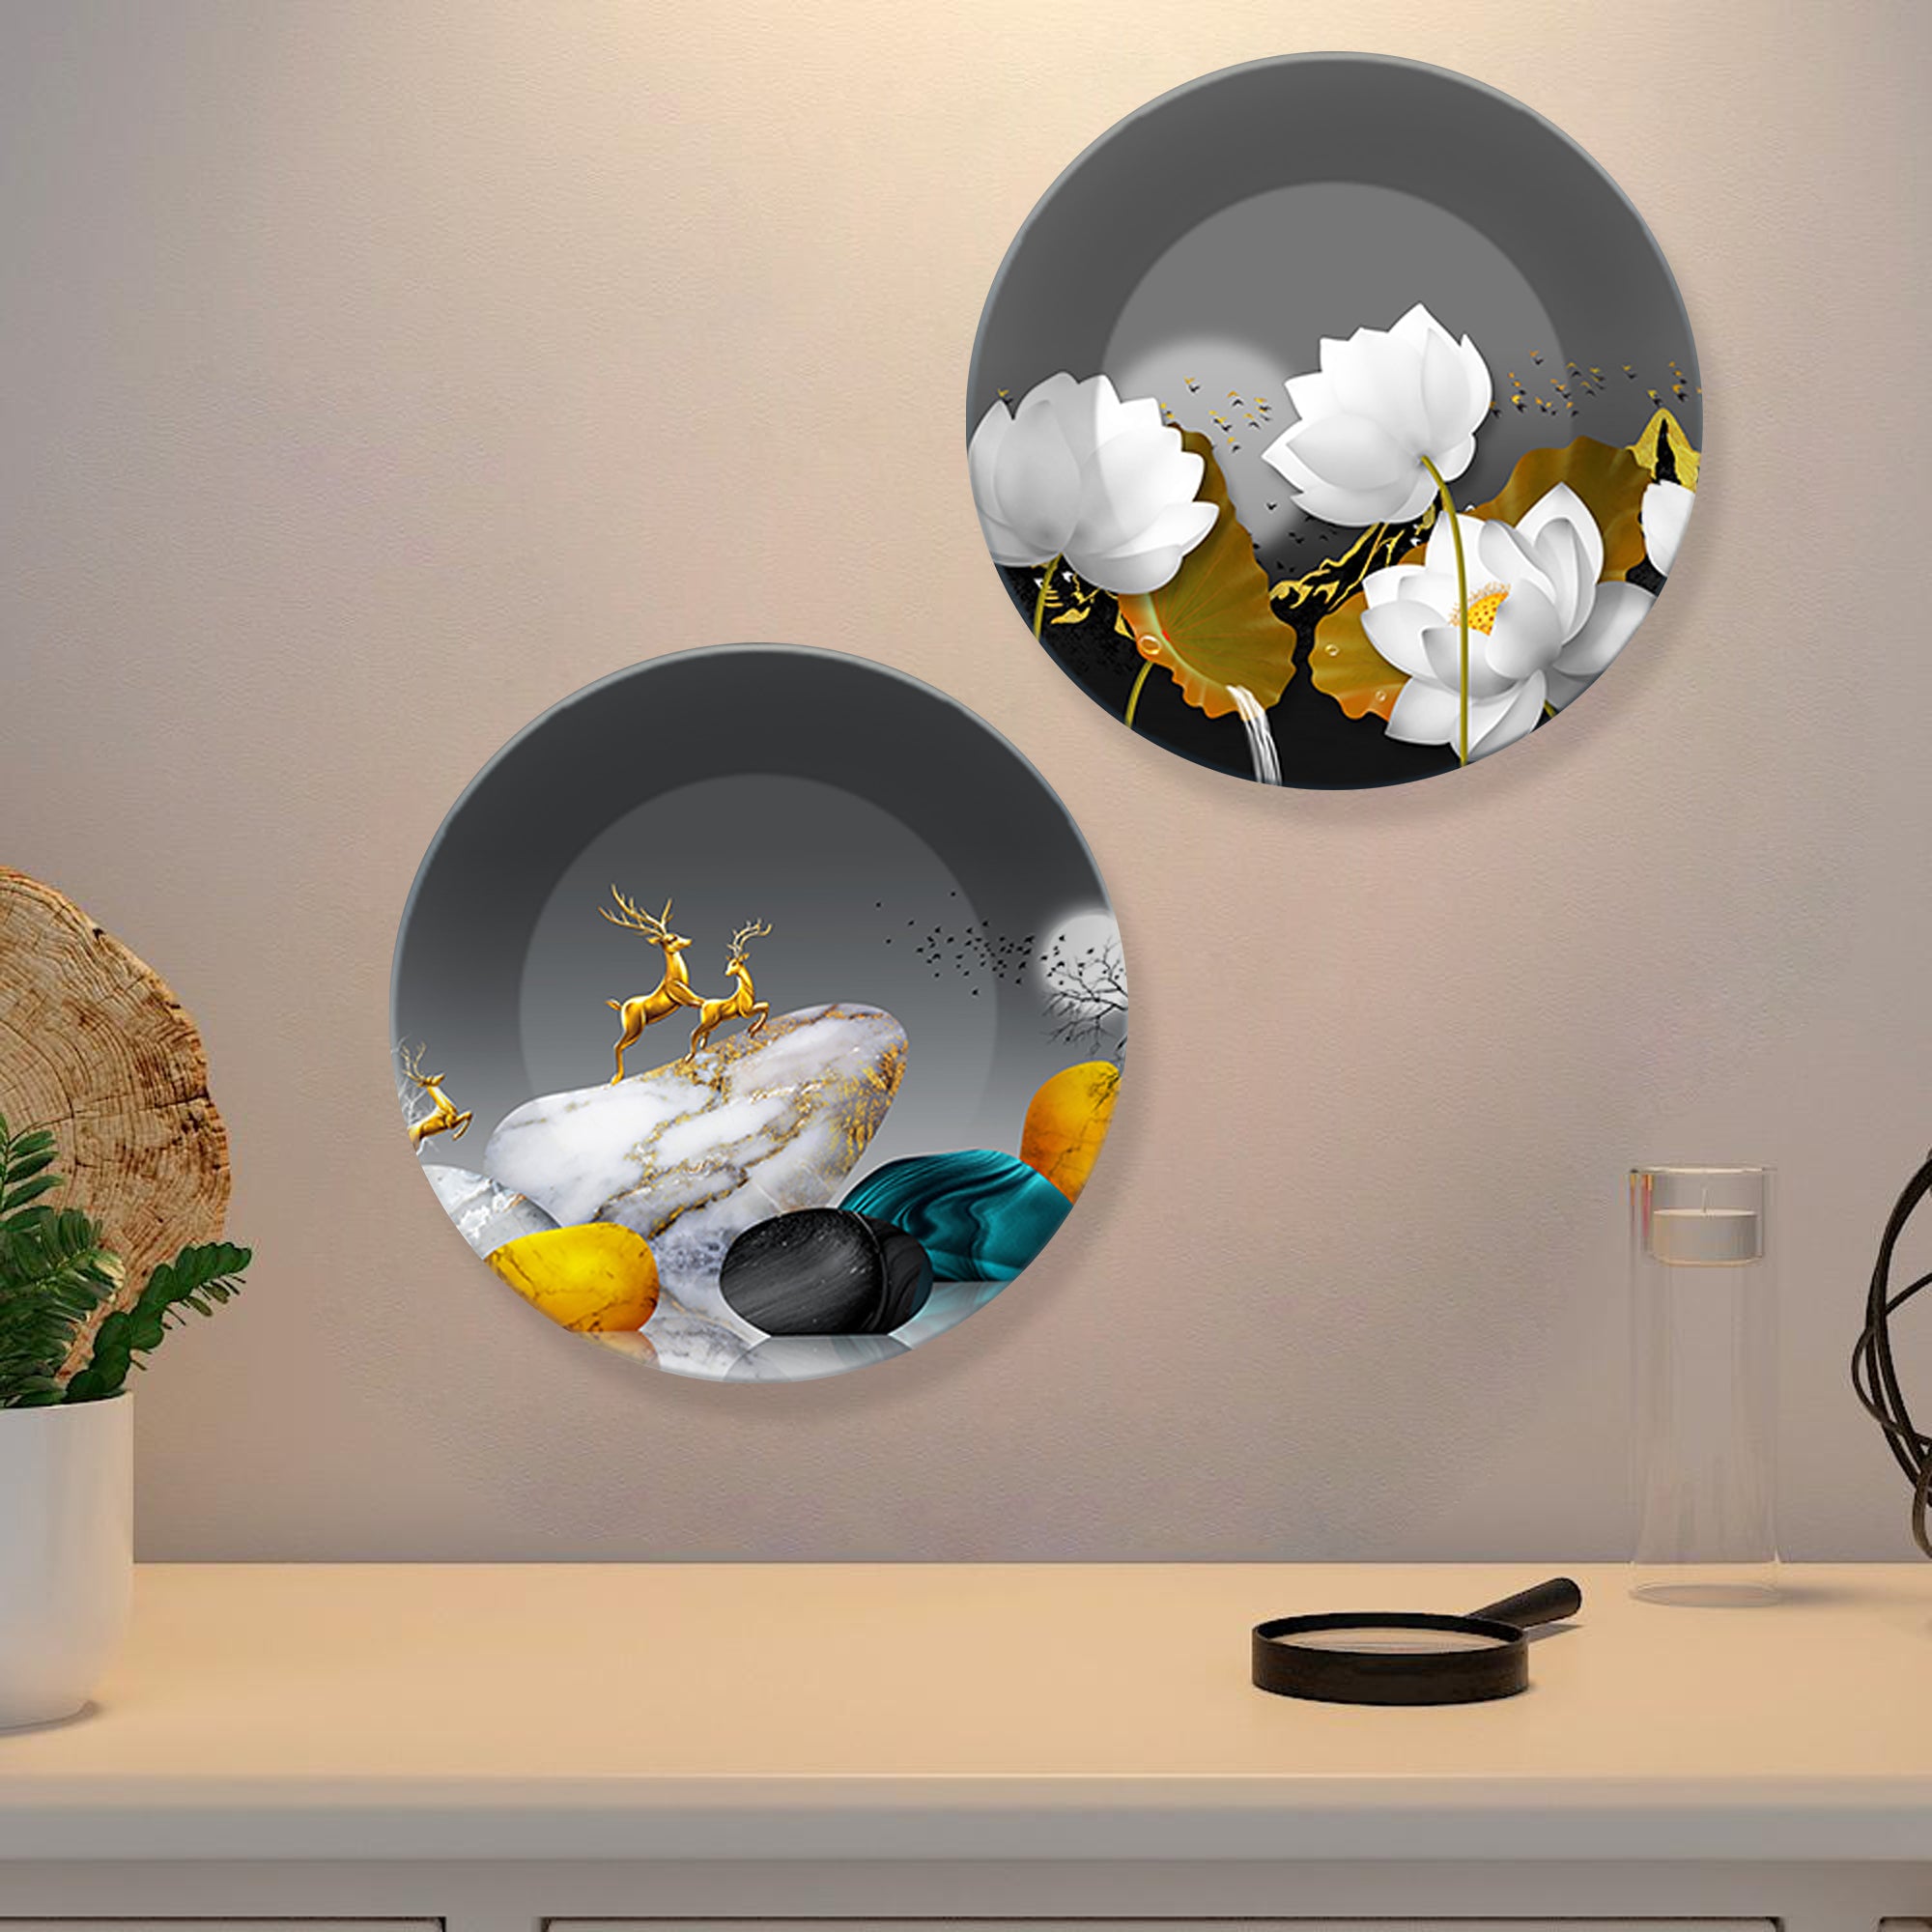 Flower and Deer Ceramic Wall Hanging Plates Set of Two